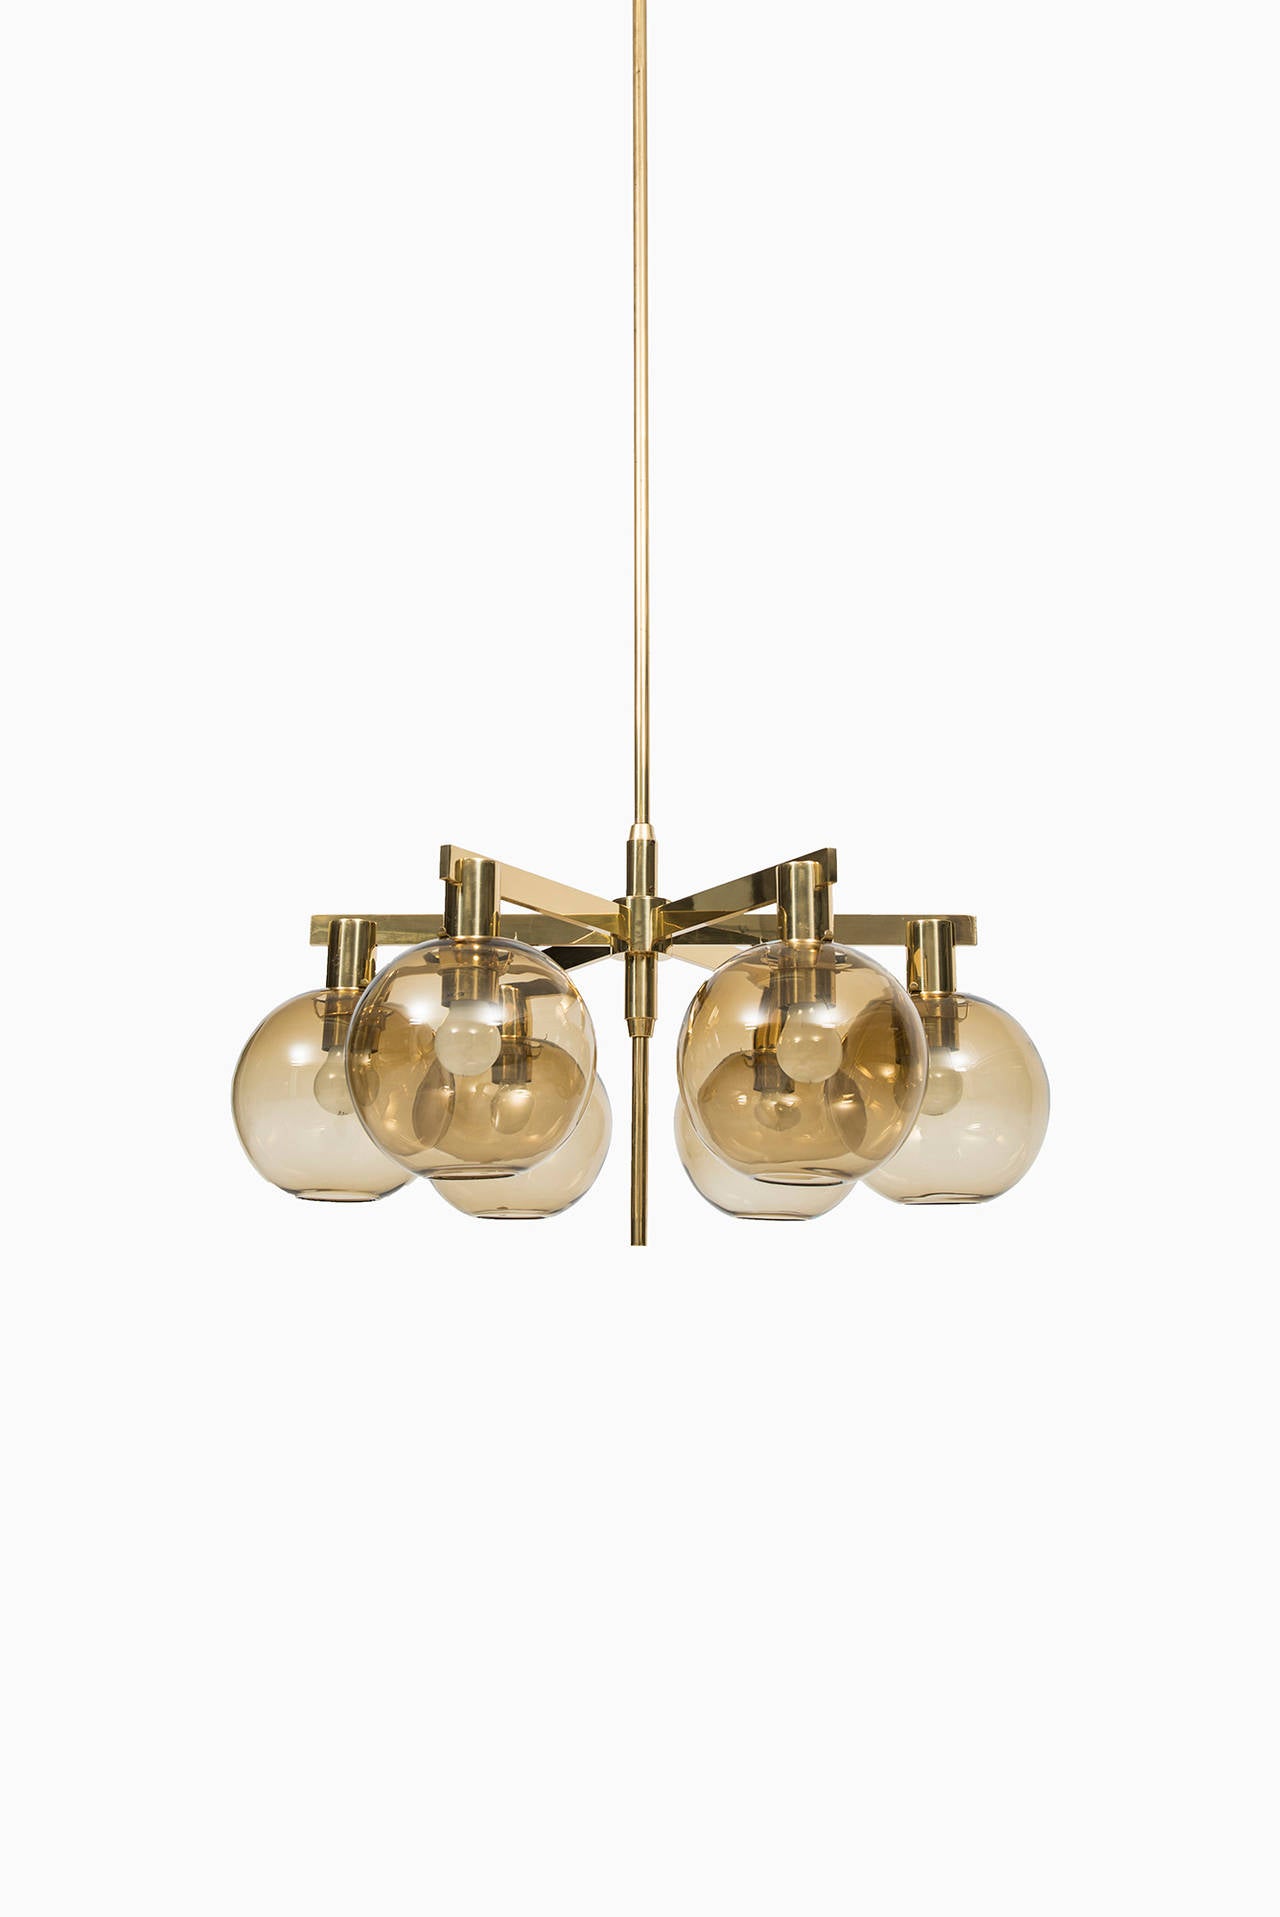 A pair of big ceiling lamps designed by Hans-Agne Jakobsson. Produced by Hans-Agne Jakobsson in Markaryd, Sweden.